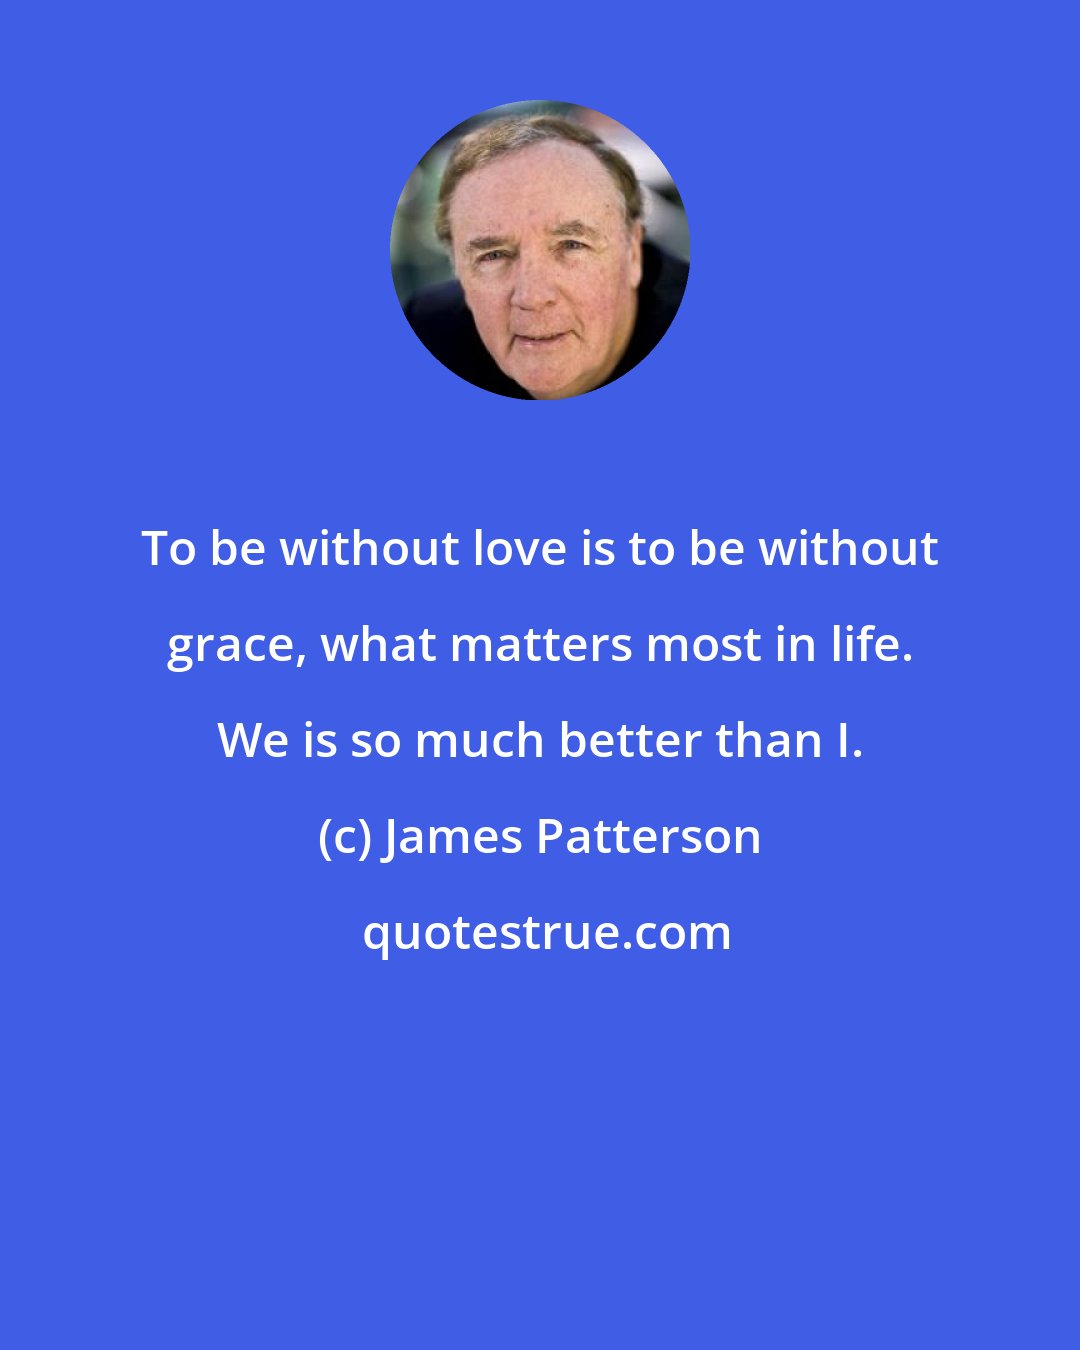 James Patterson: To be without love is to be without grace, what matters most in life. We is so much better than I.